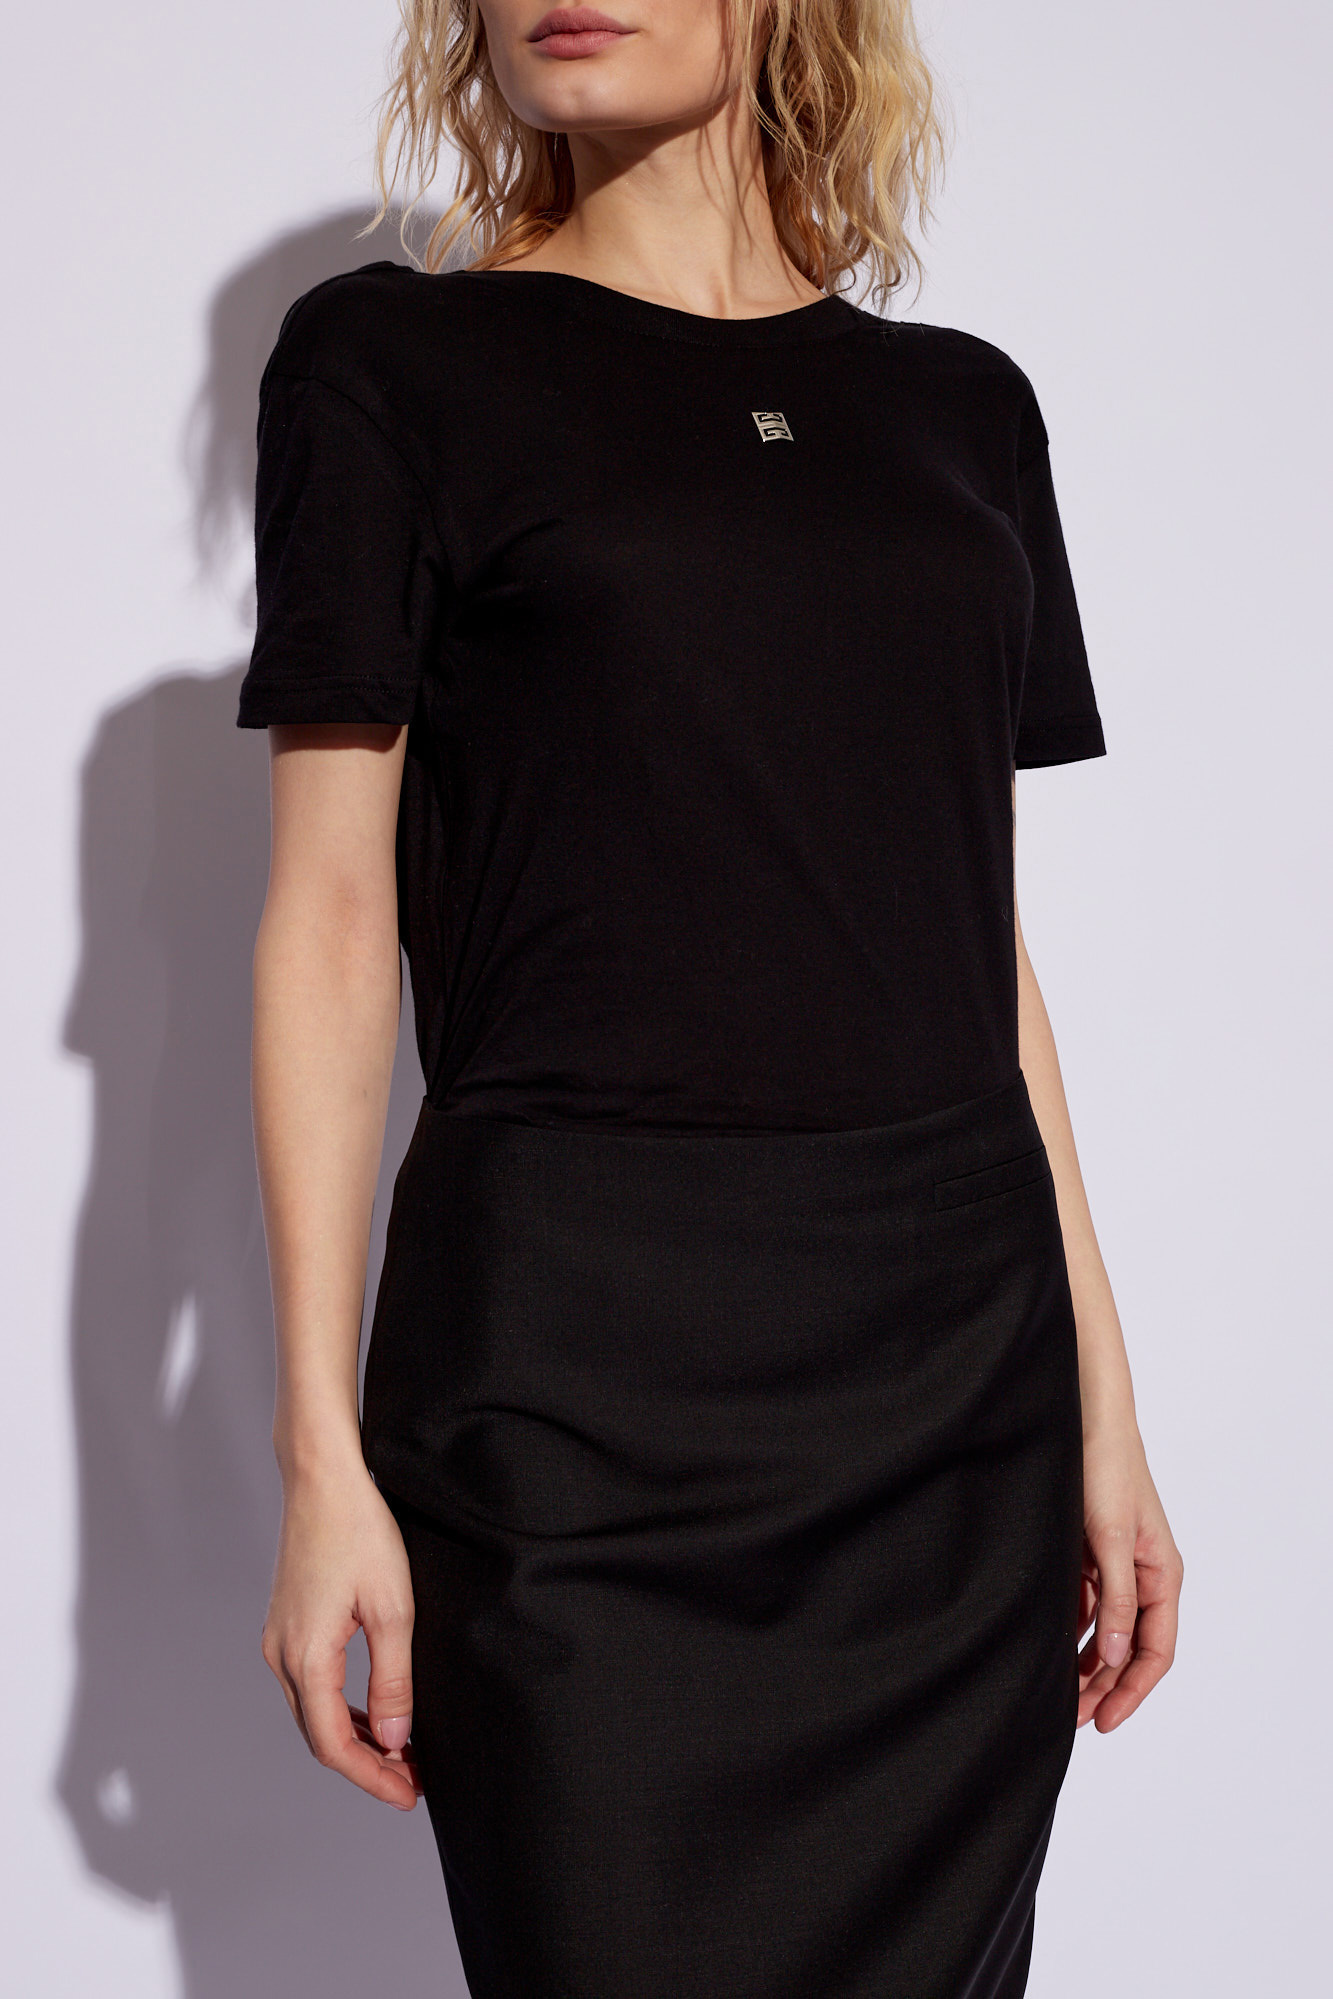 Givenchy T-shirt with a back neckline